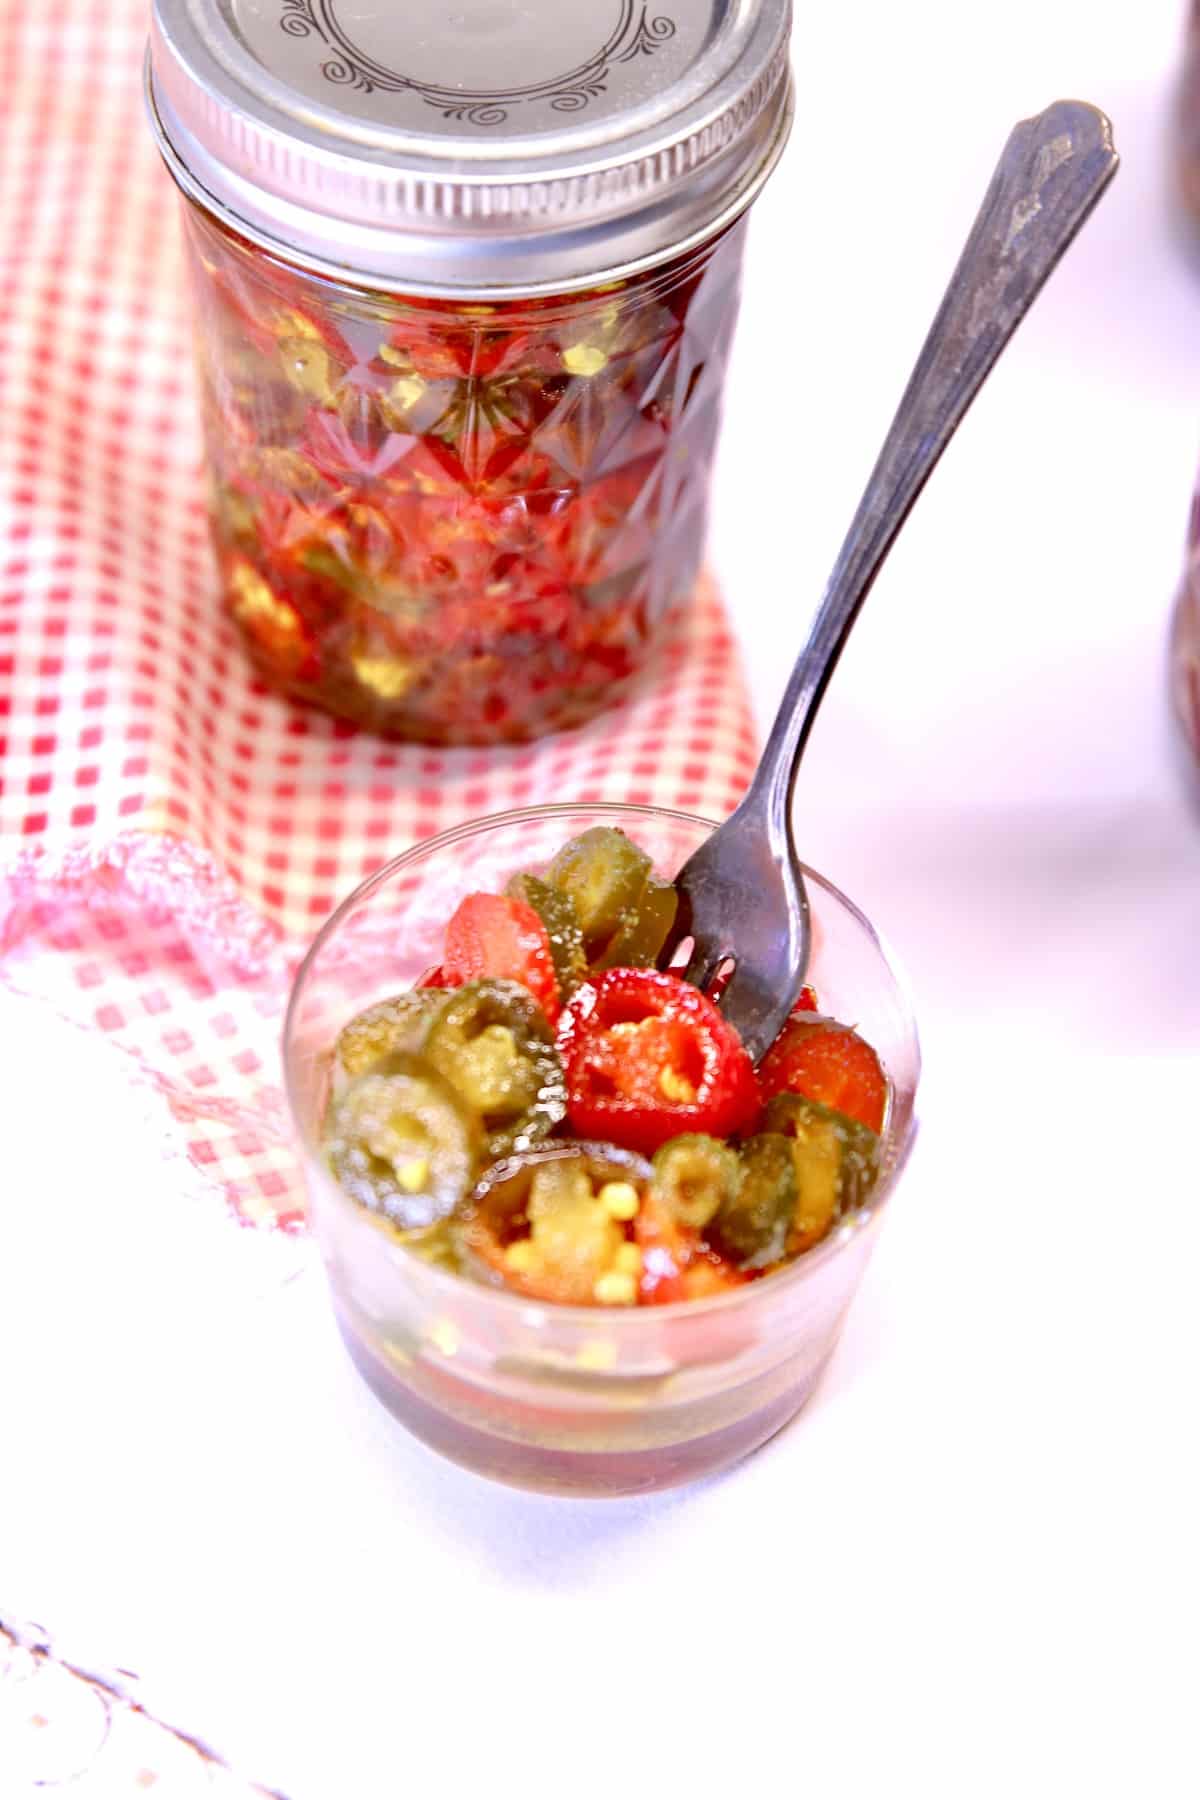 jar and bowl of candied jalapenos.